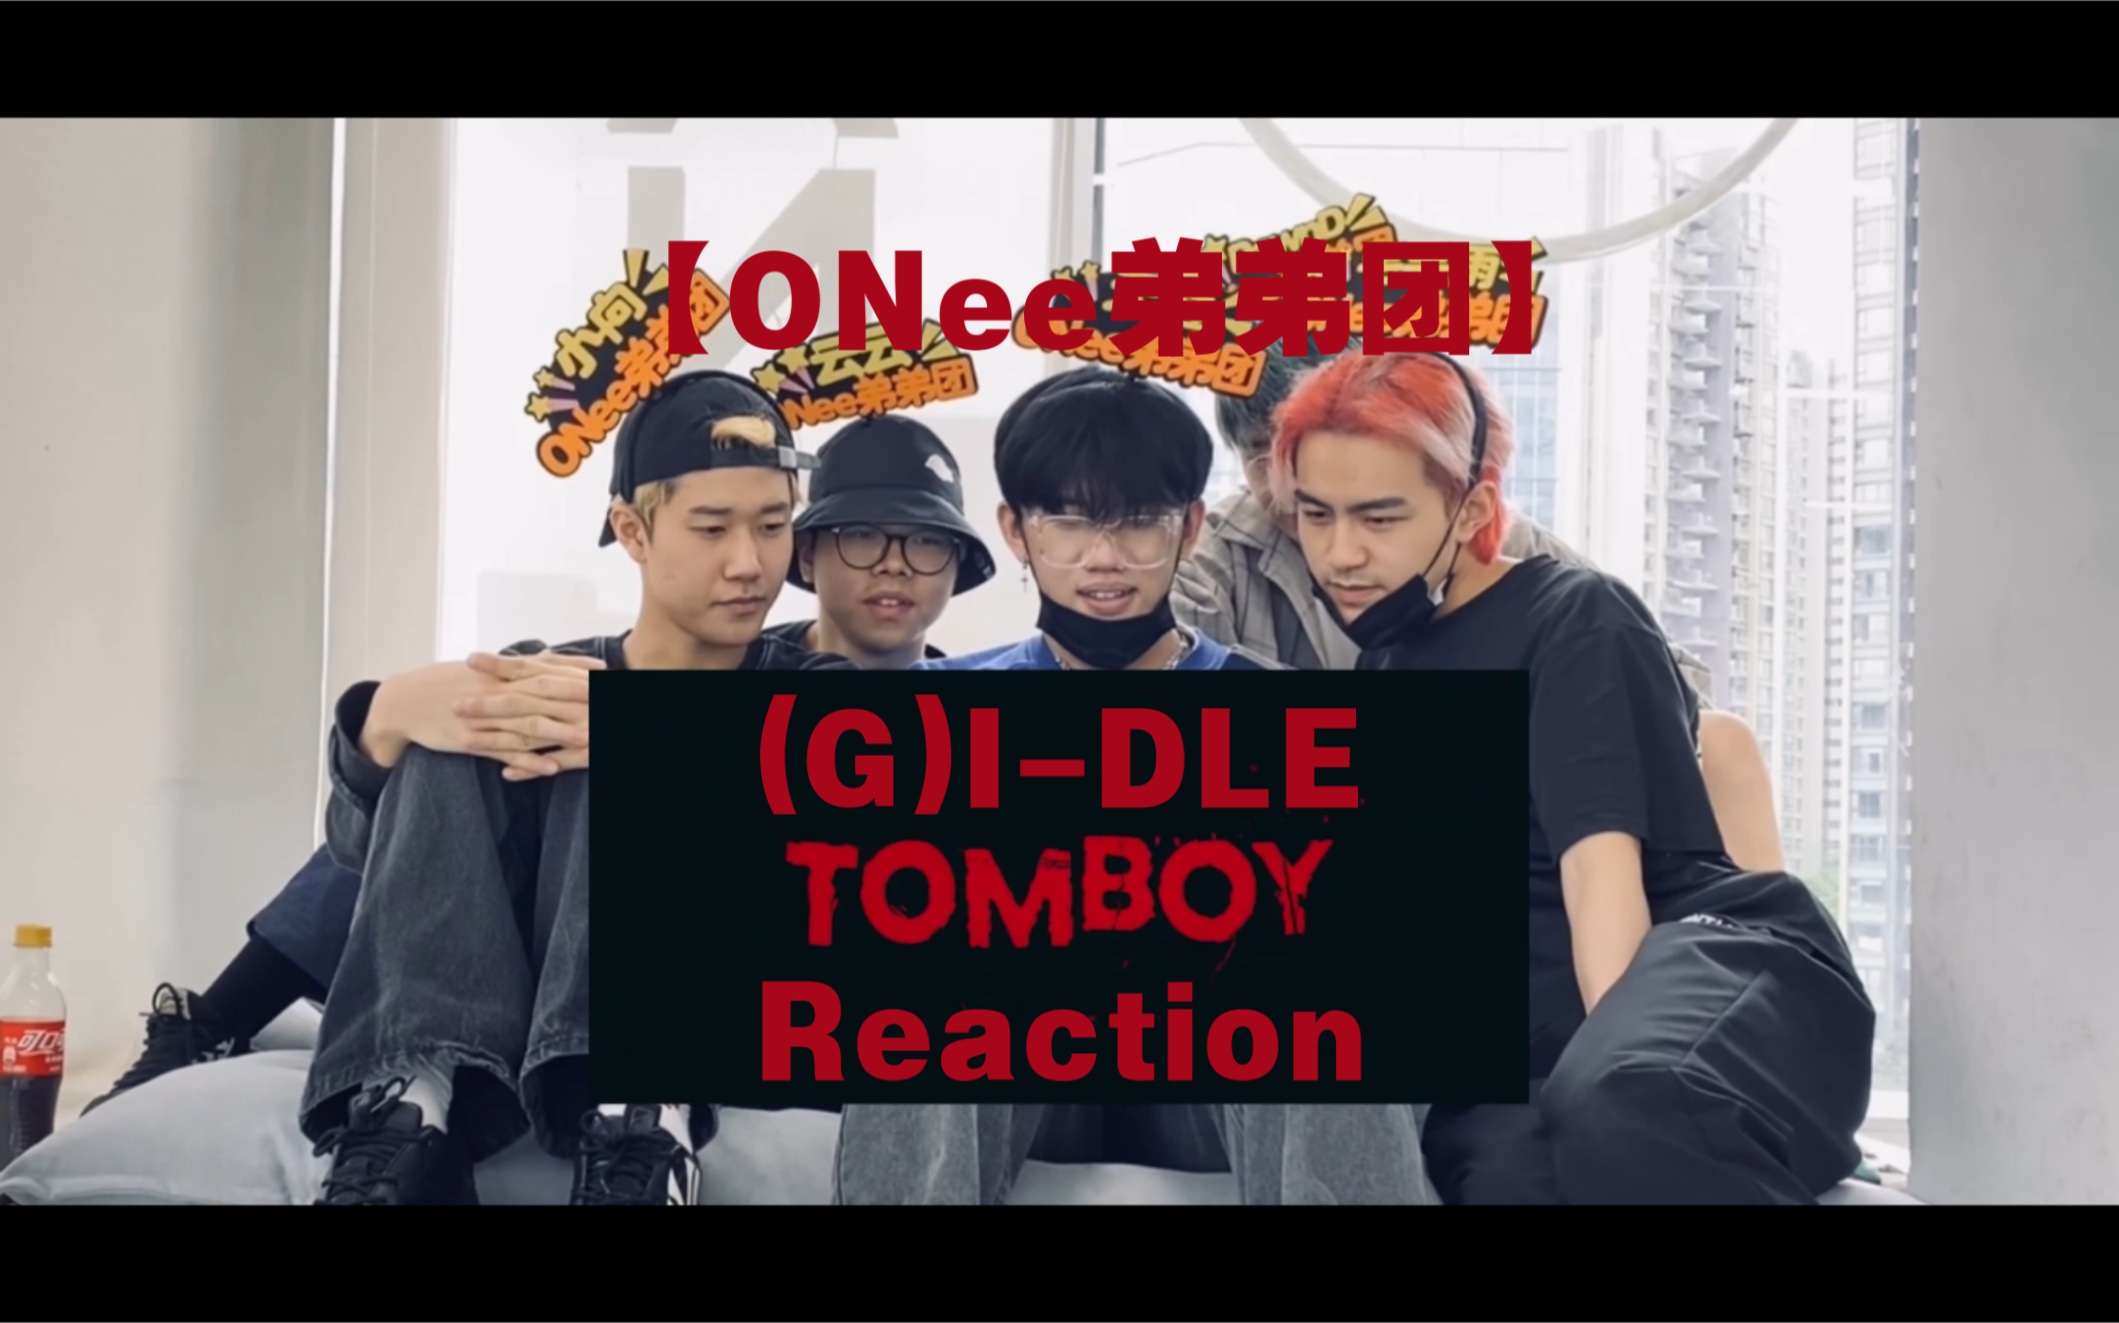 【ONee弟弟团】(G)I-DLE新歌《TOMBOY》Reaction